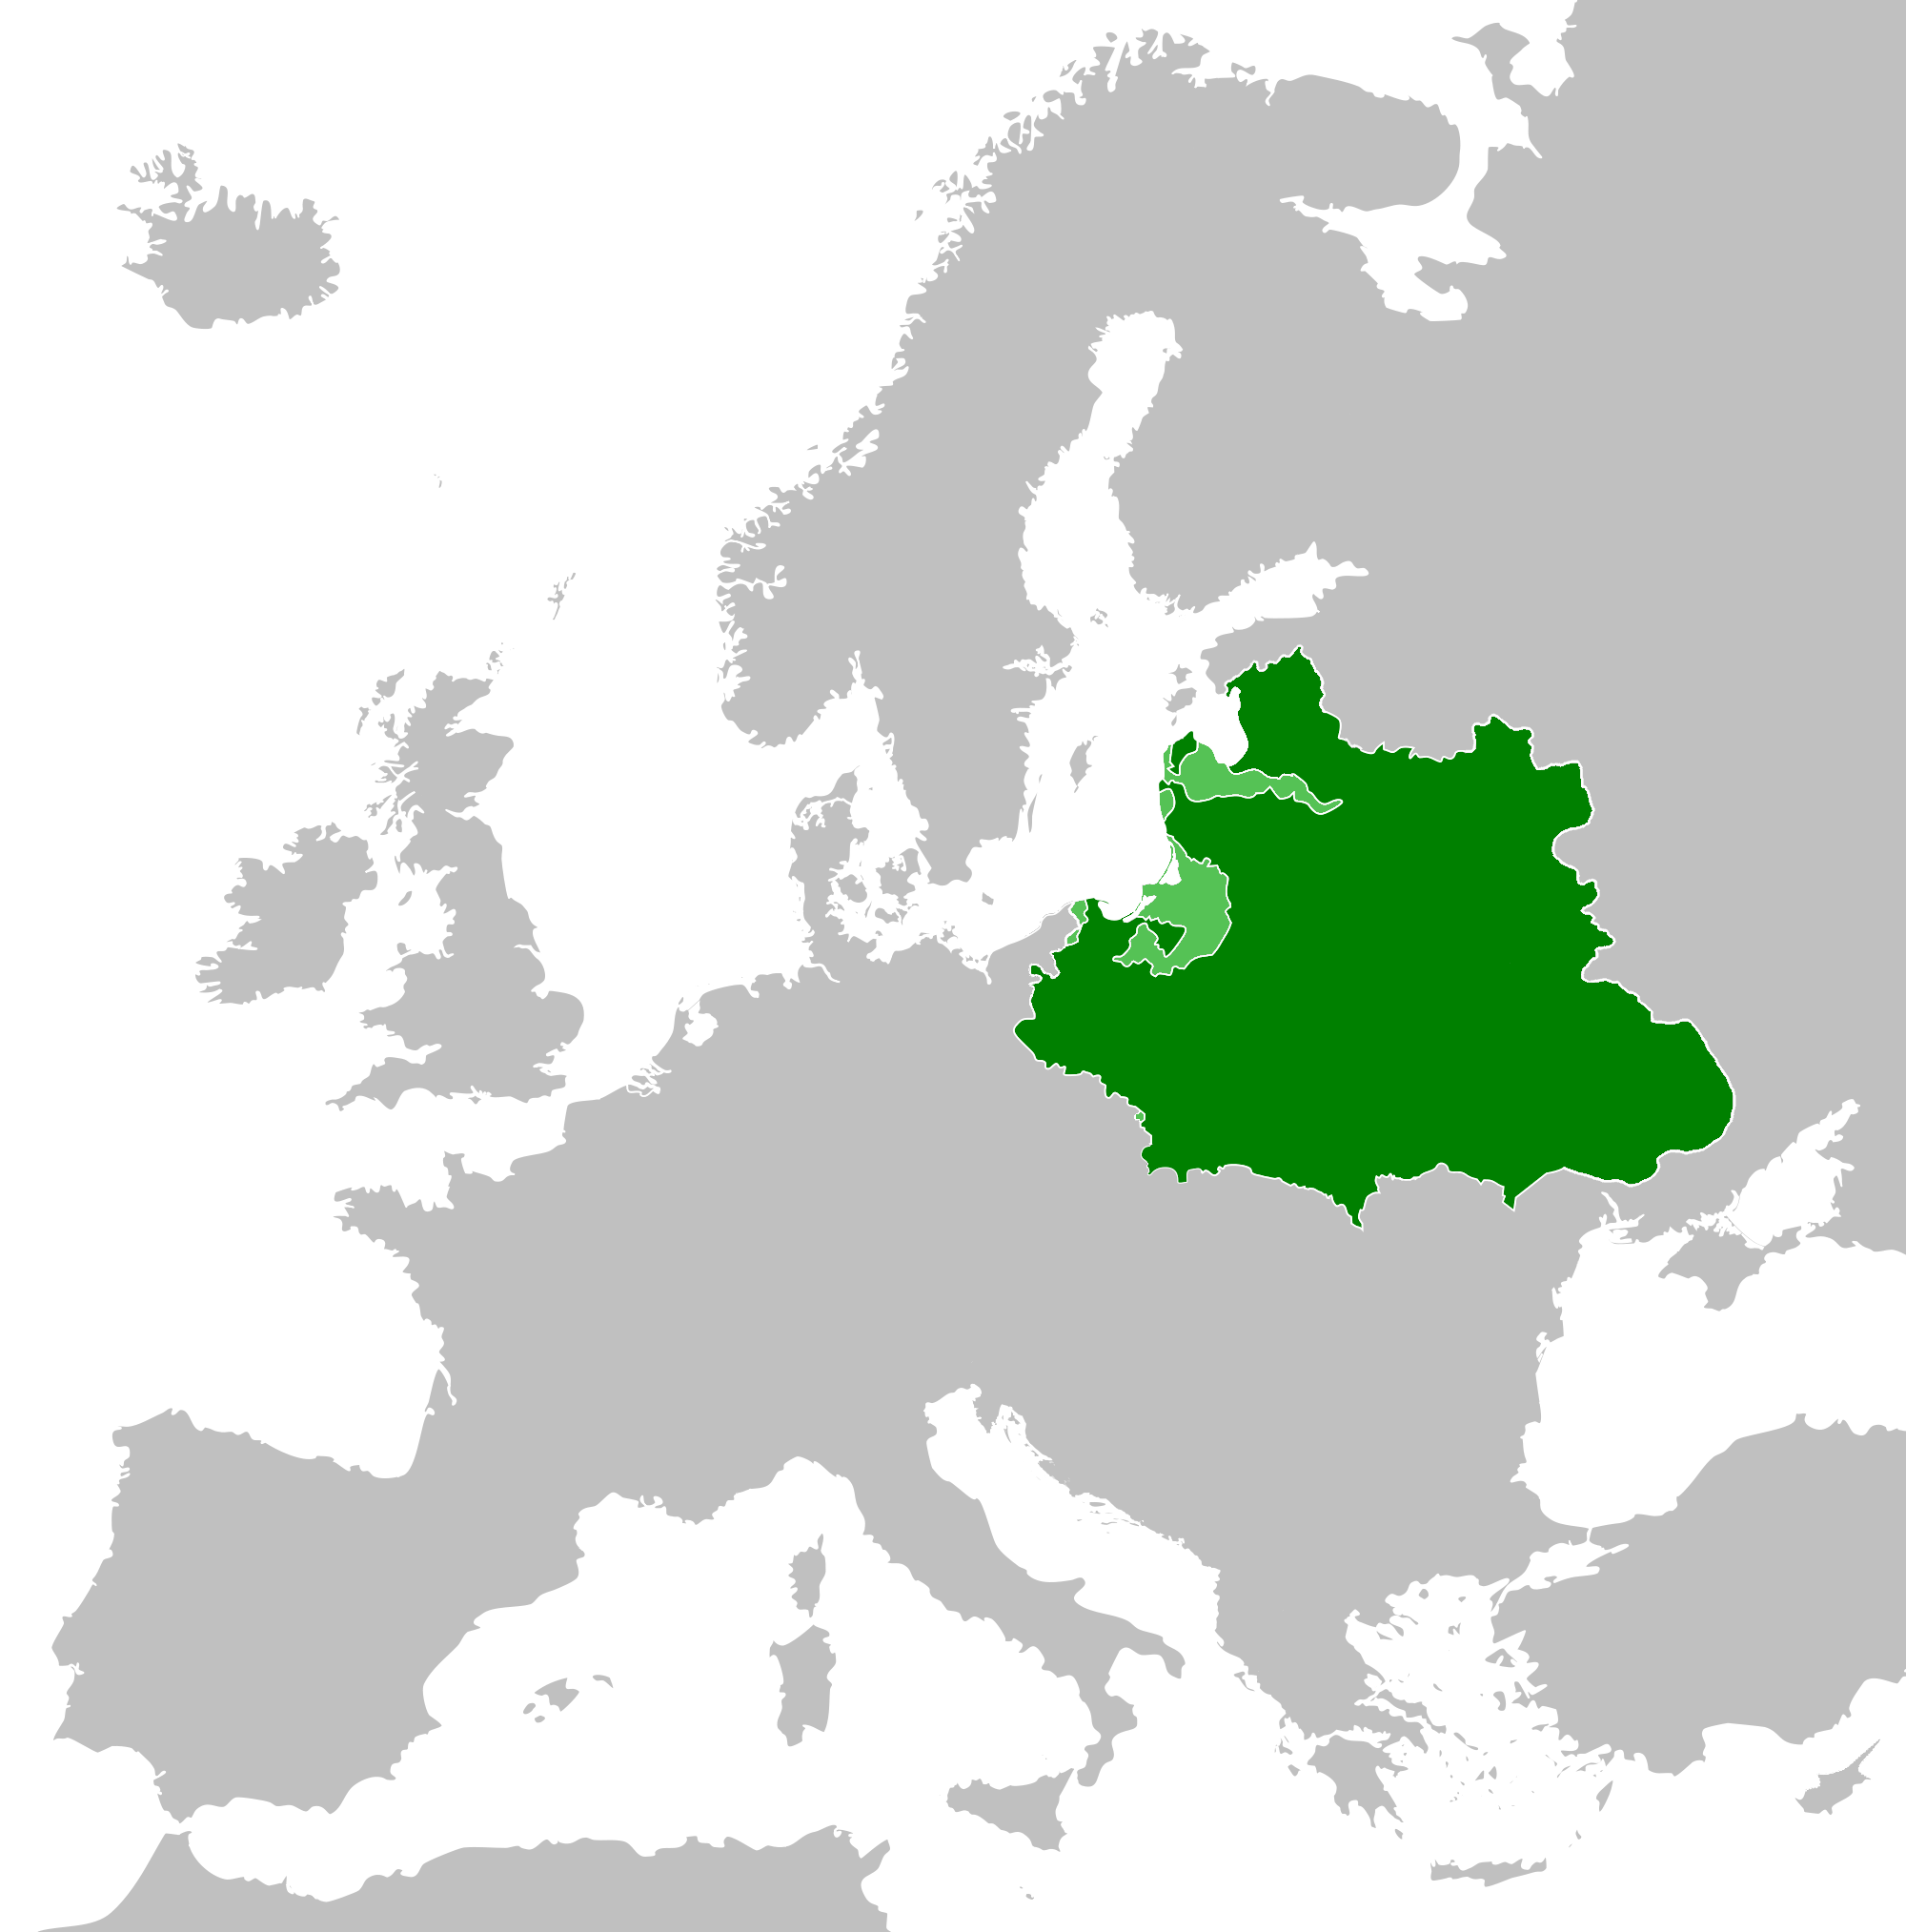 Poland–Lithuania in 1620 with vassal states in light green